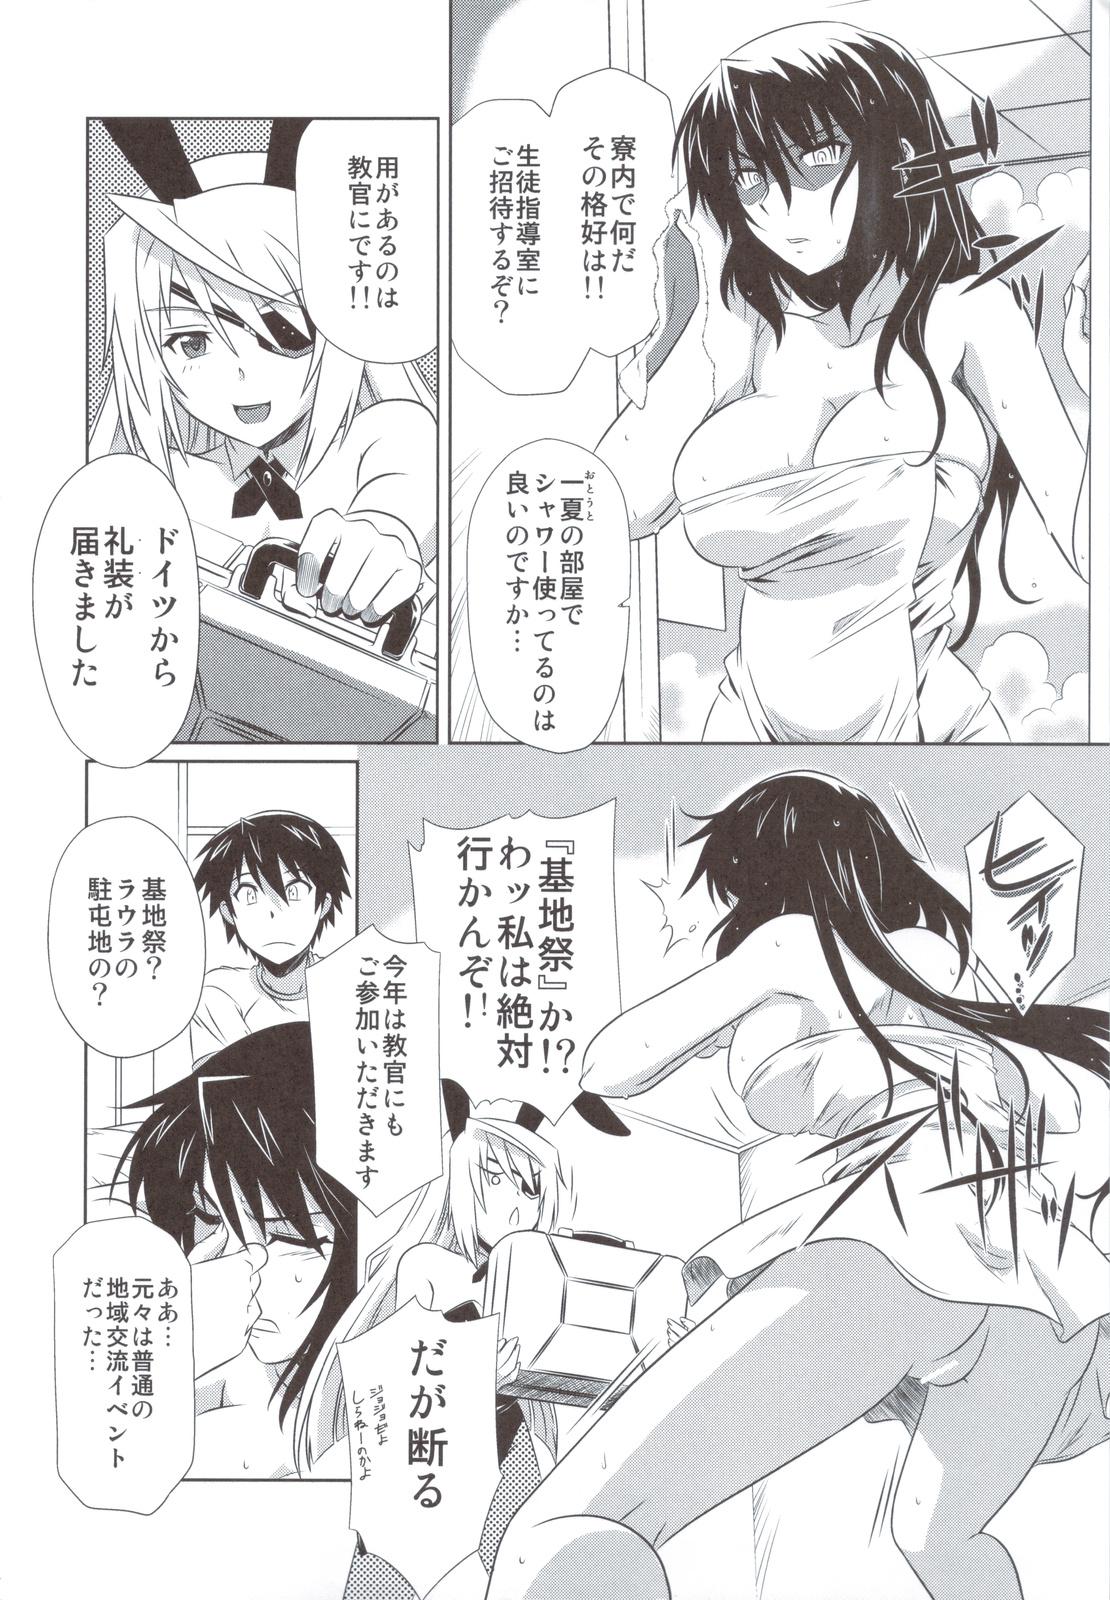 HD is Incest Strategy 3 - Infinite stratos Muscle - Page 3